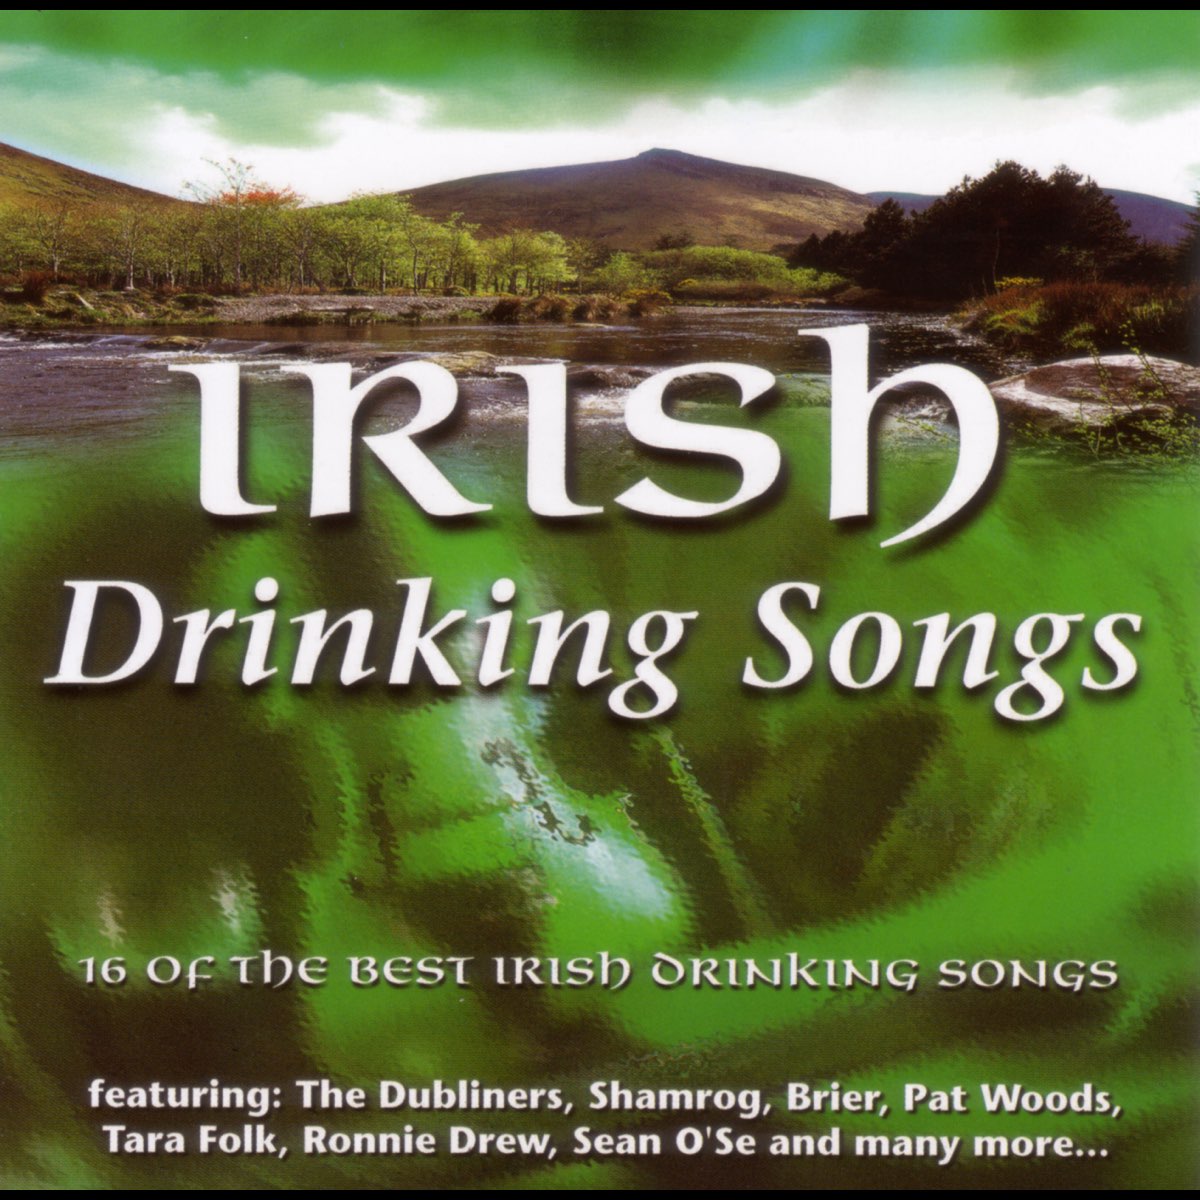 Irish drunk song. The Dubliners the Rocky Road. The Dubliners - the Rocky Road to Dublin. John close drinking Song. The 50 best drinking Songs.